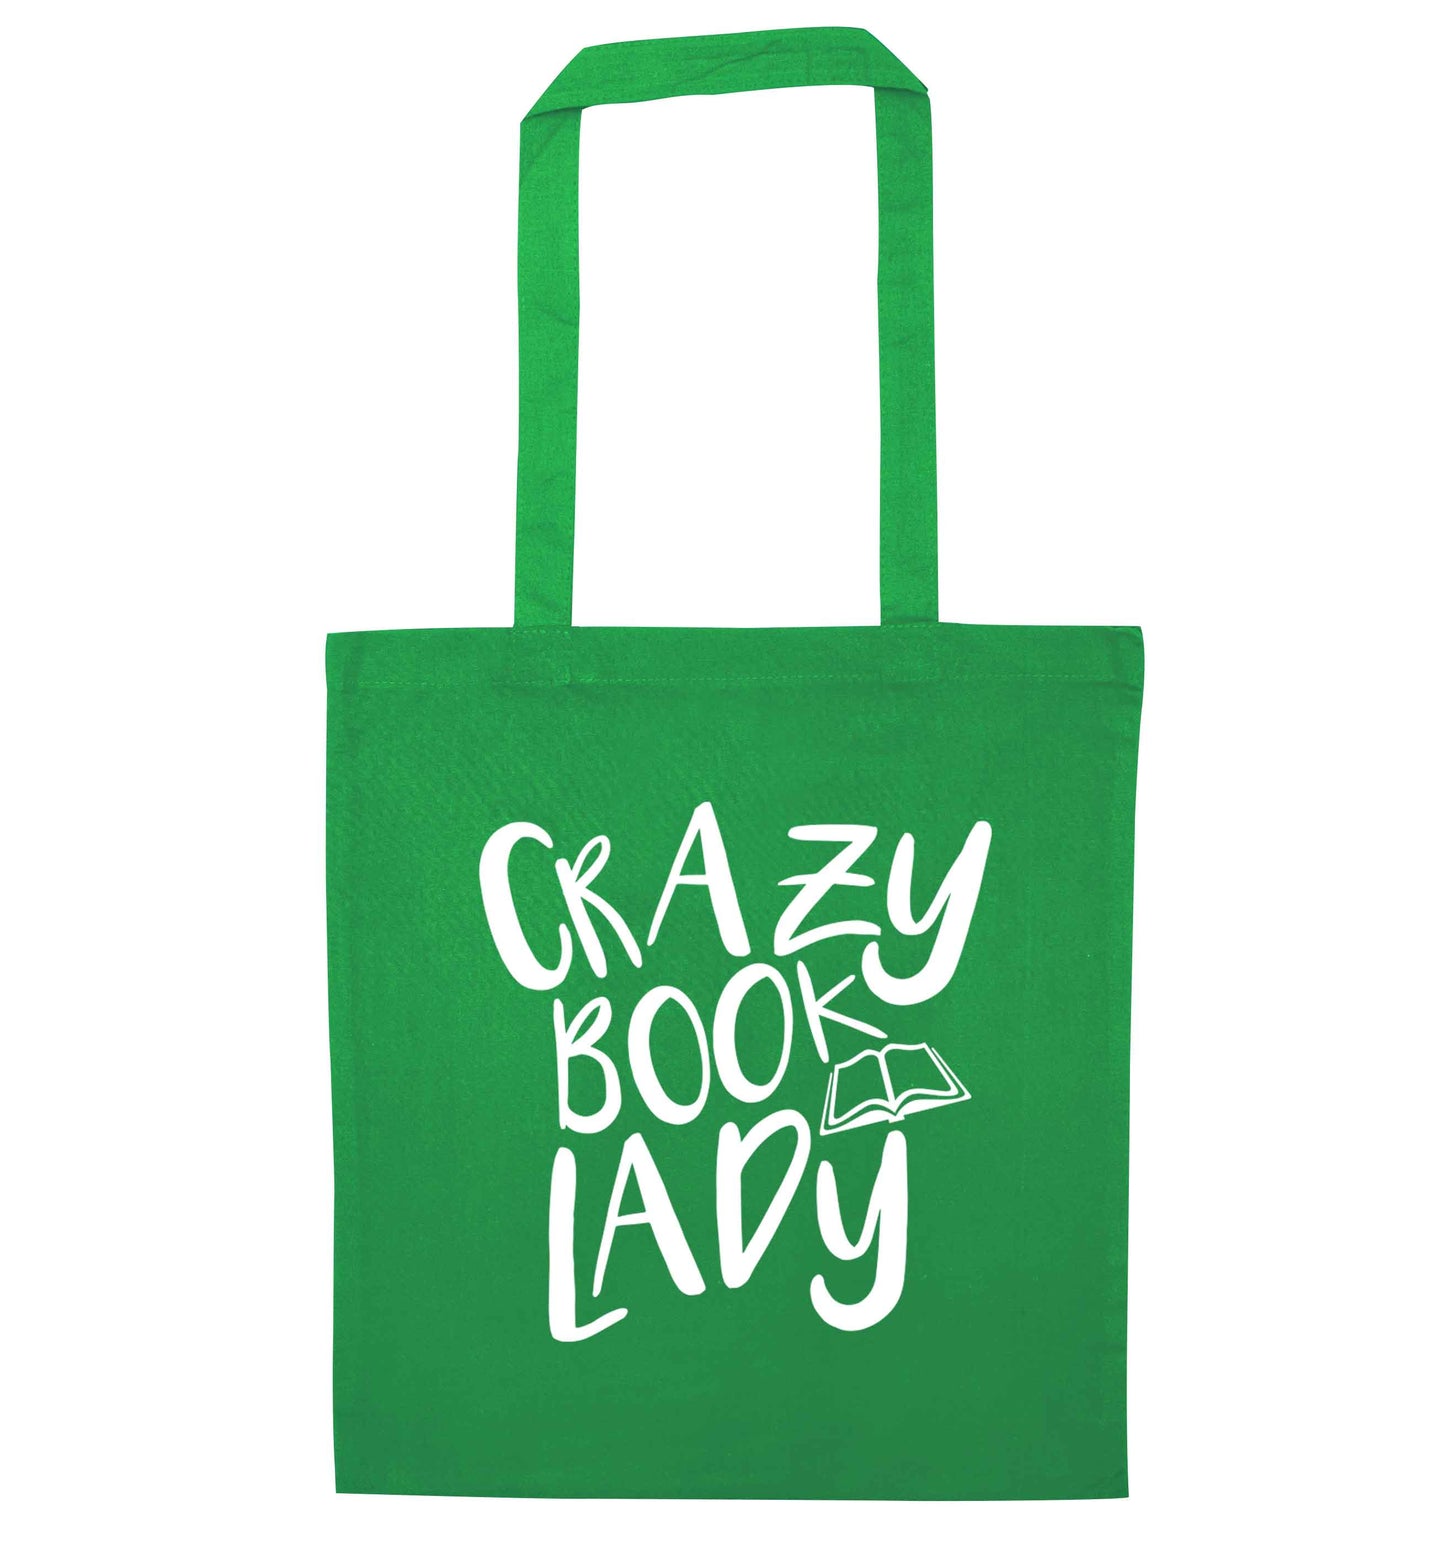 Crazy book lady green tote bag